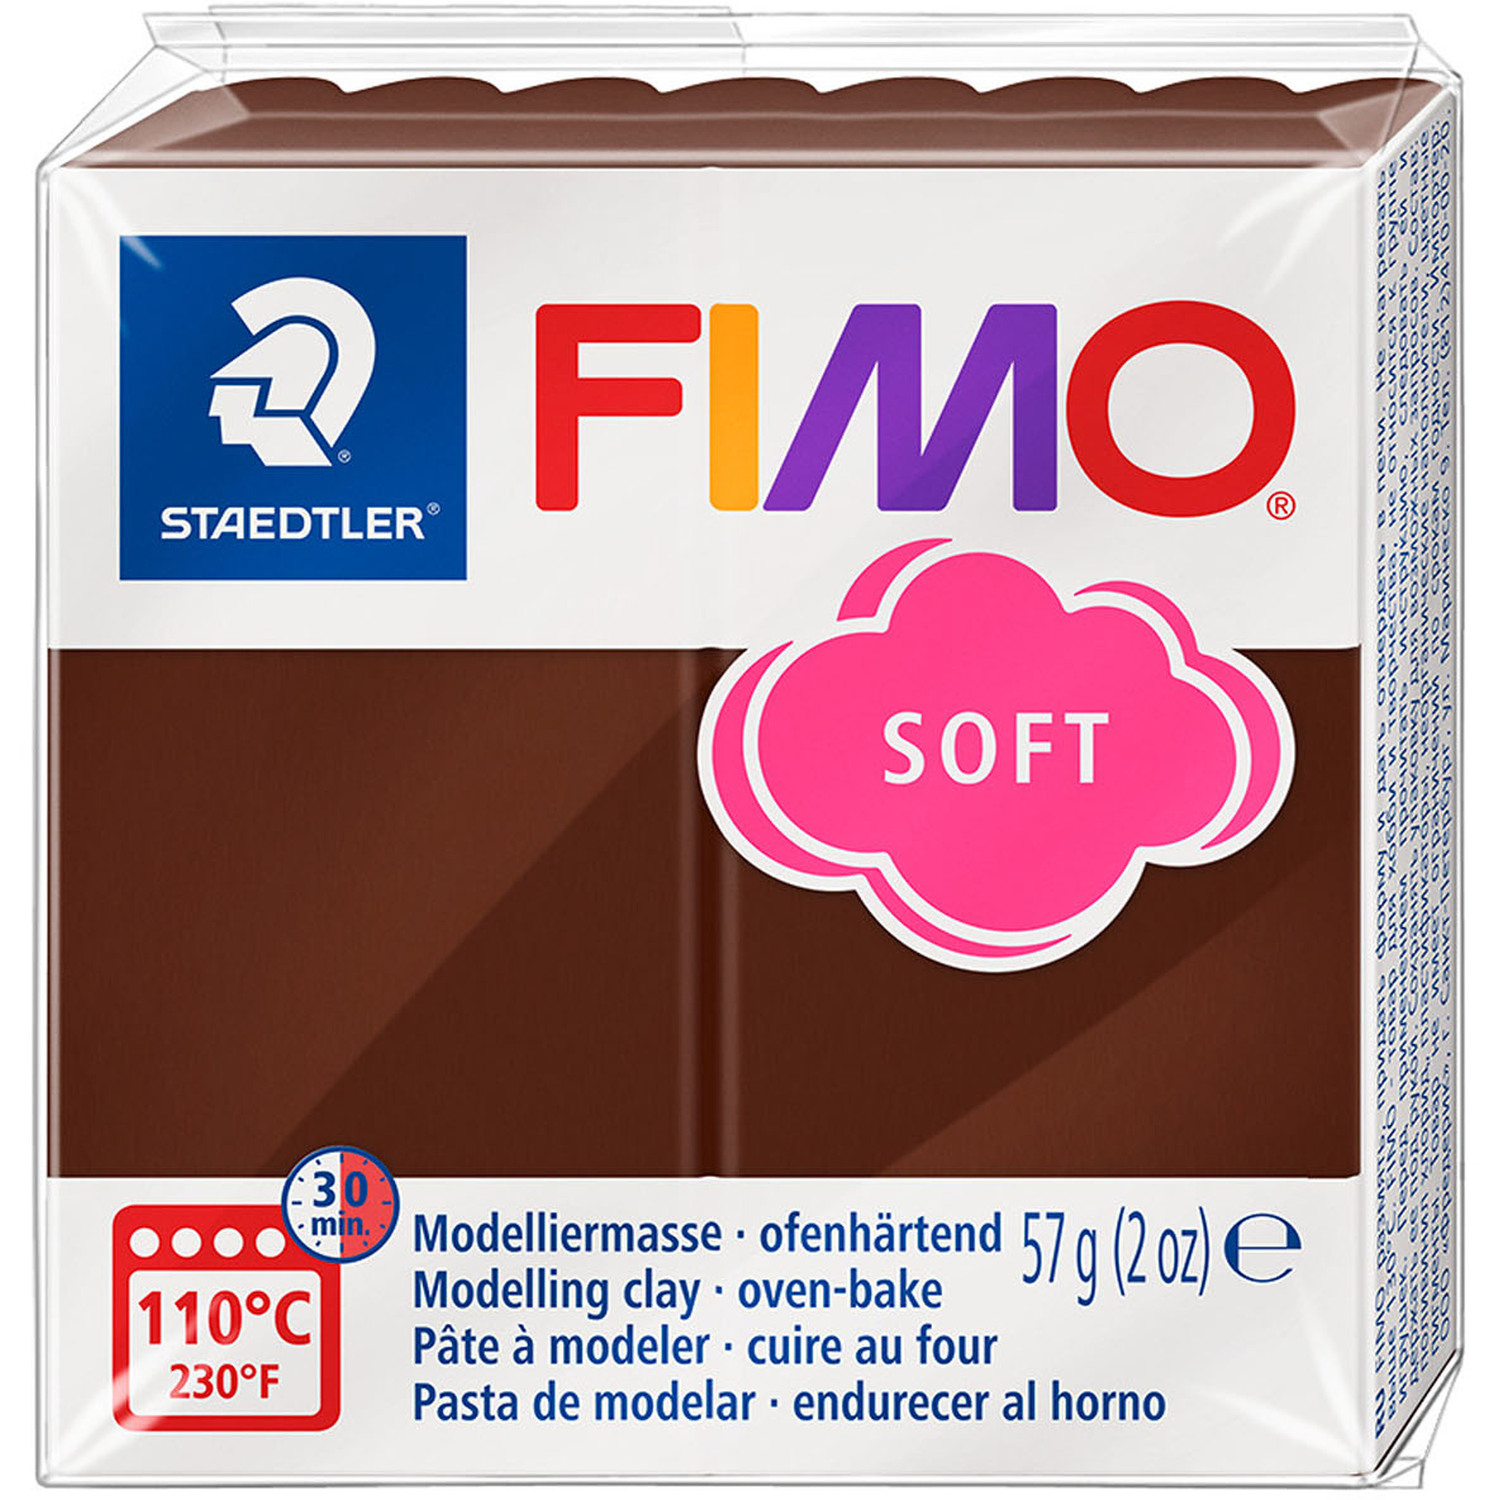 Staedtler FIMO Soft Modelling Clay Block - Chocolate Image 1